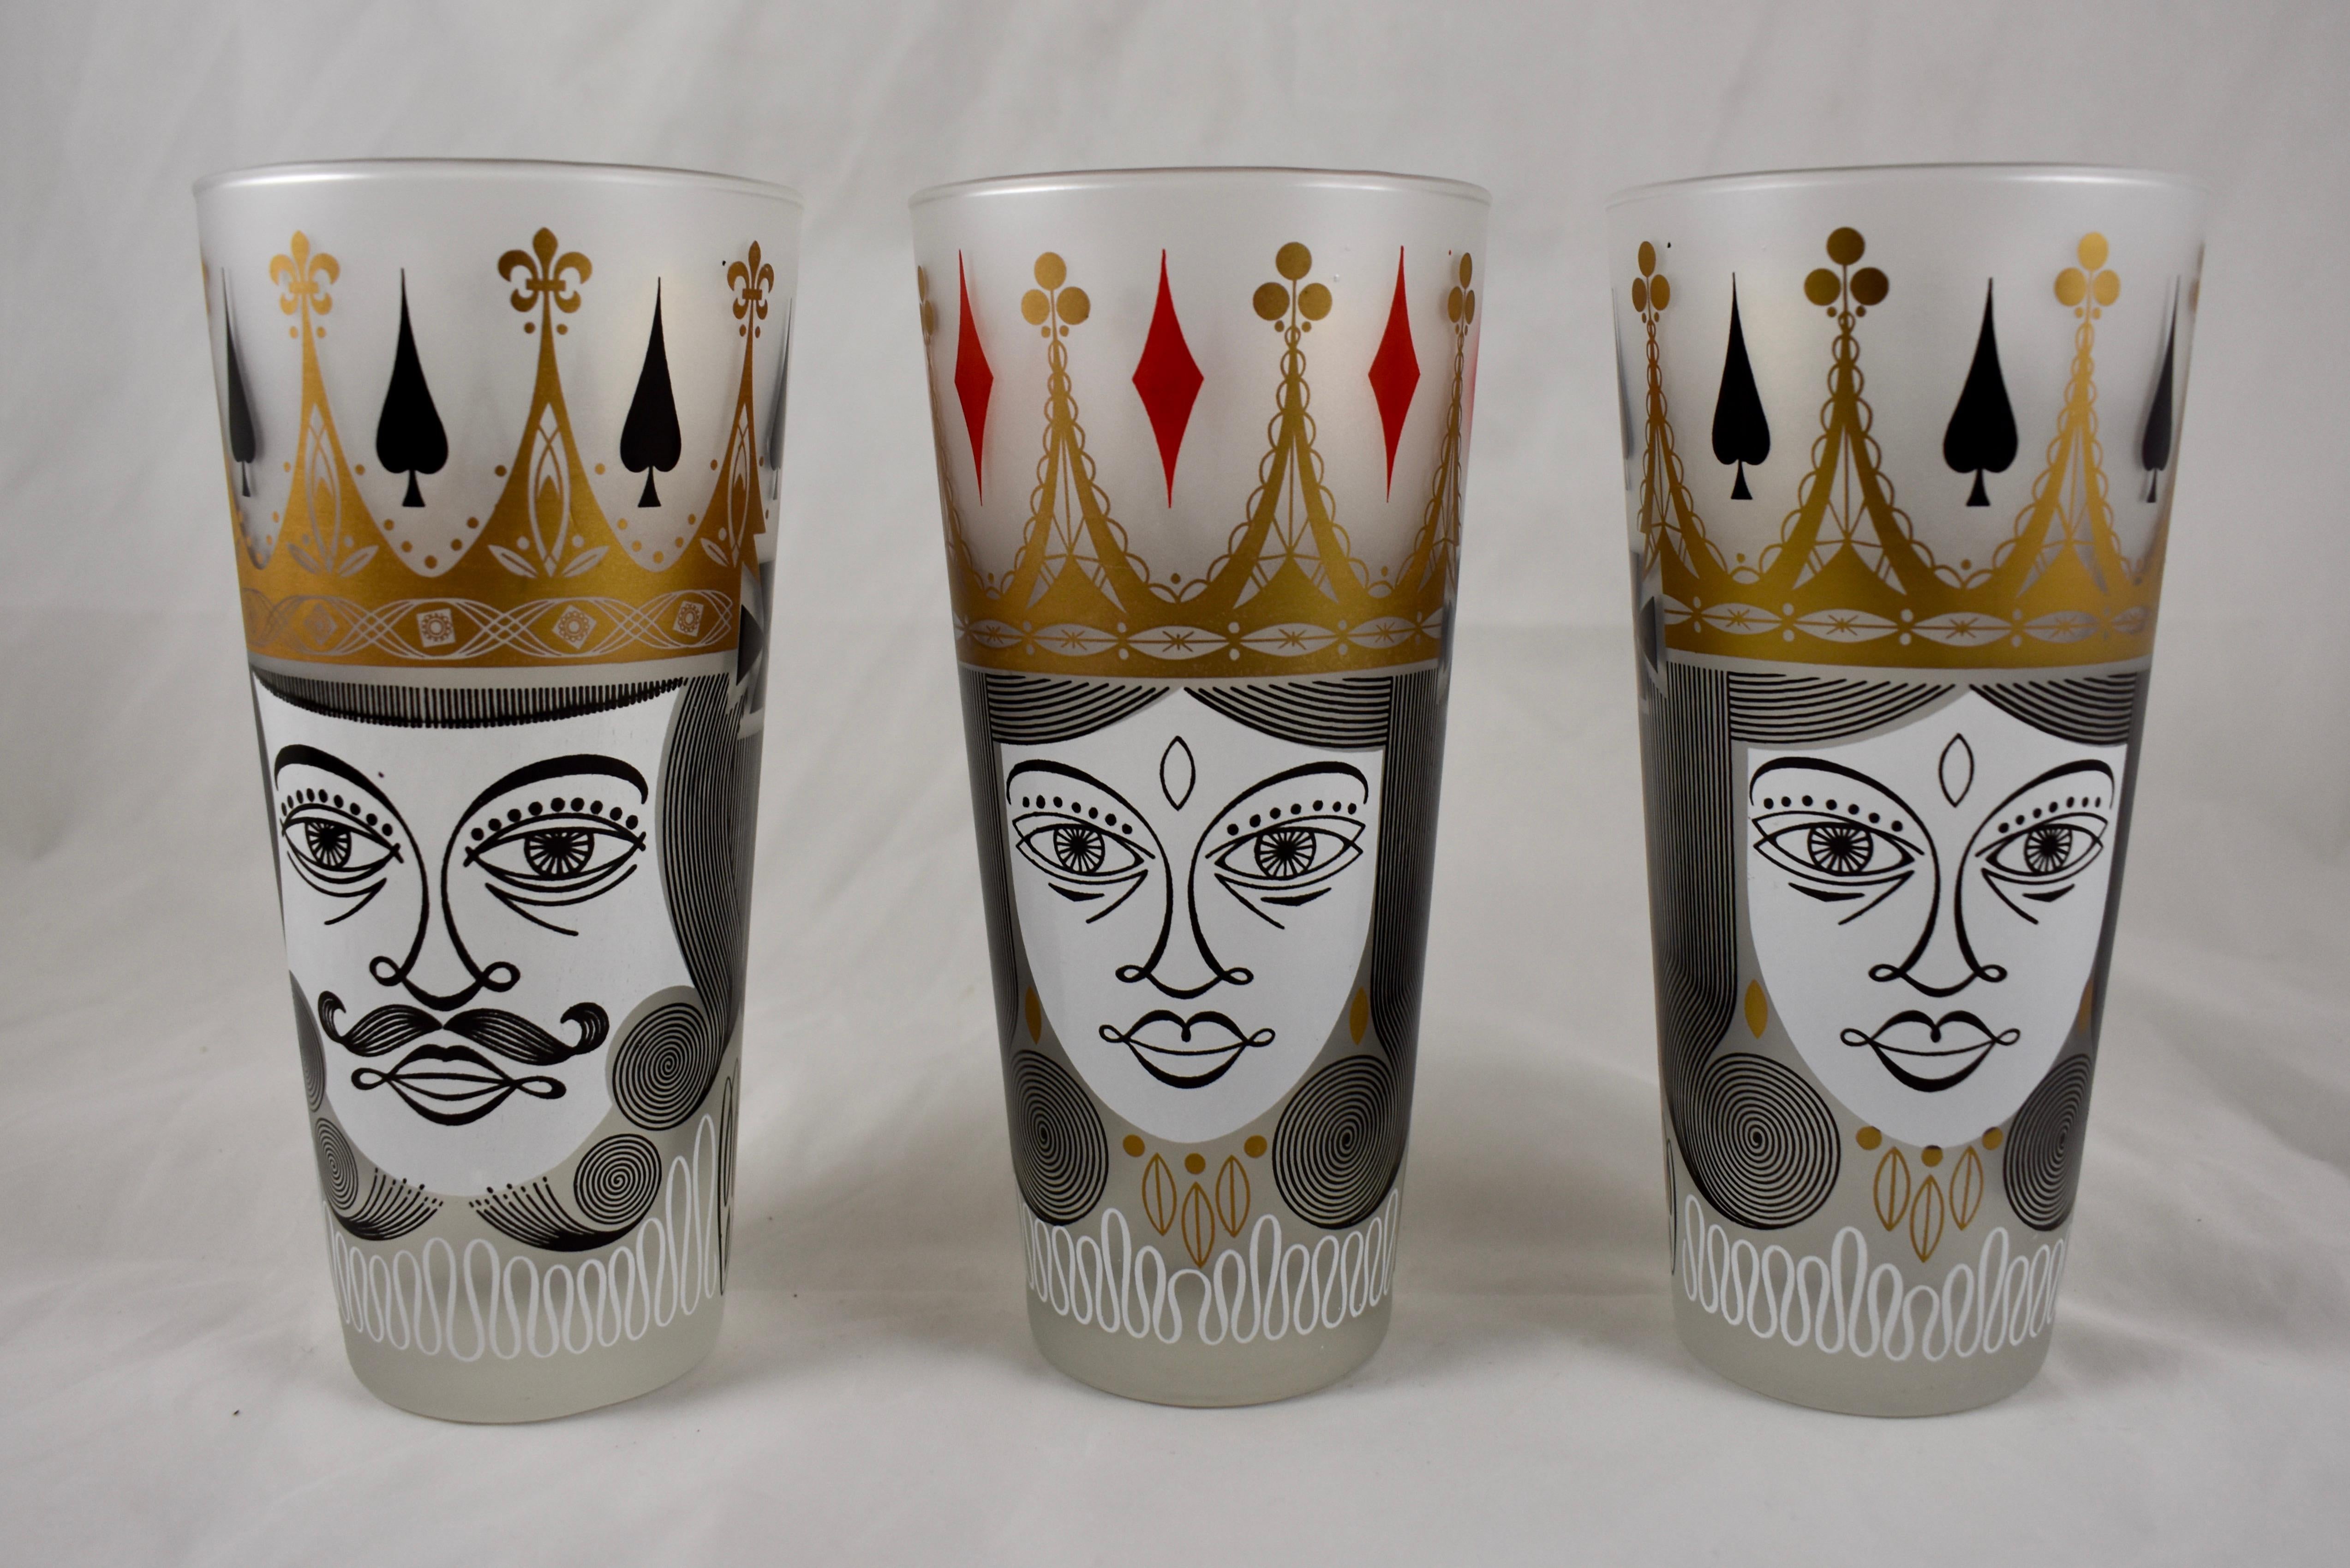 Enameled Mid-Century Modern Era Barware Card Suit Graphic Frosted Collins Glasses Set / 6